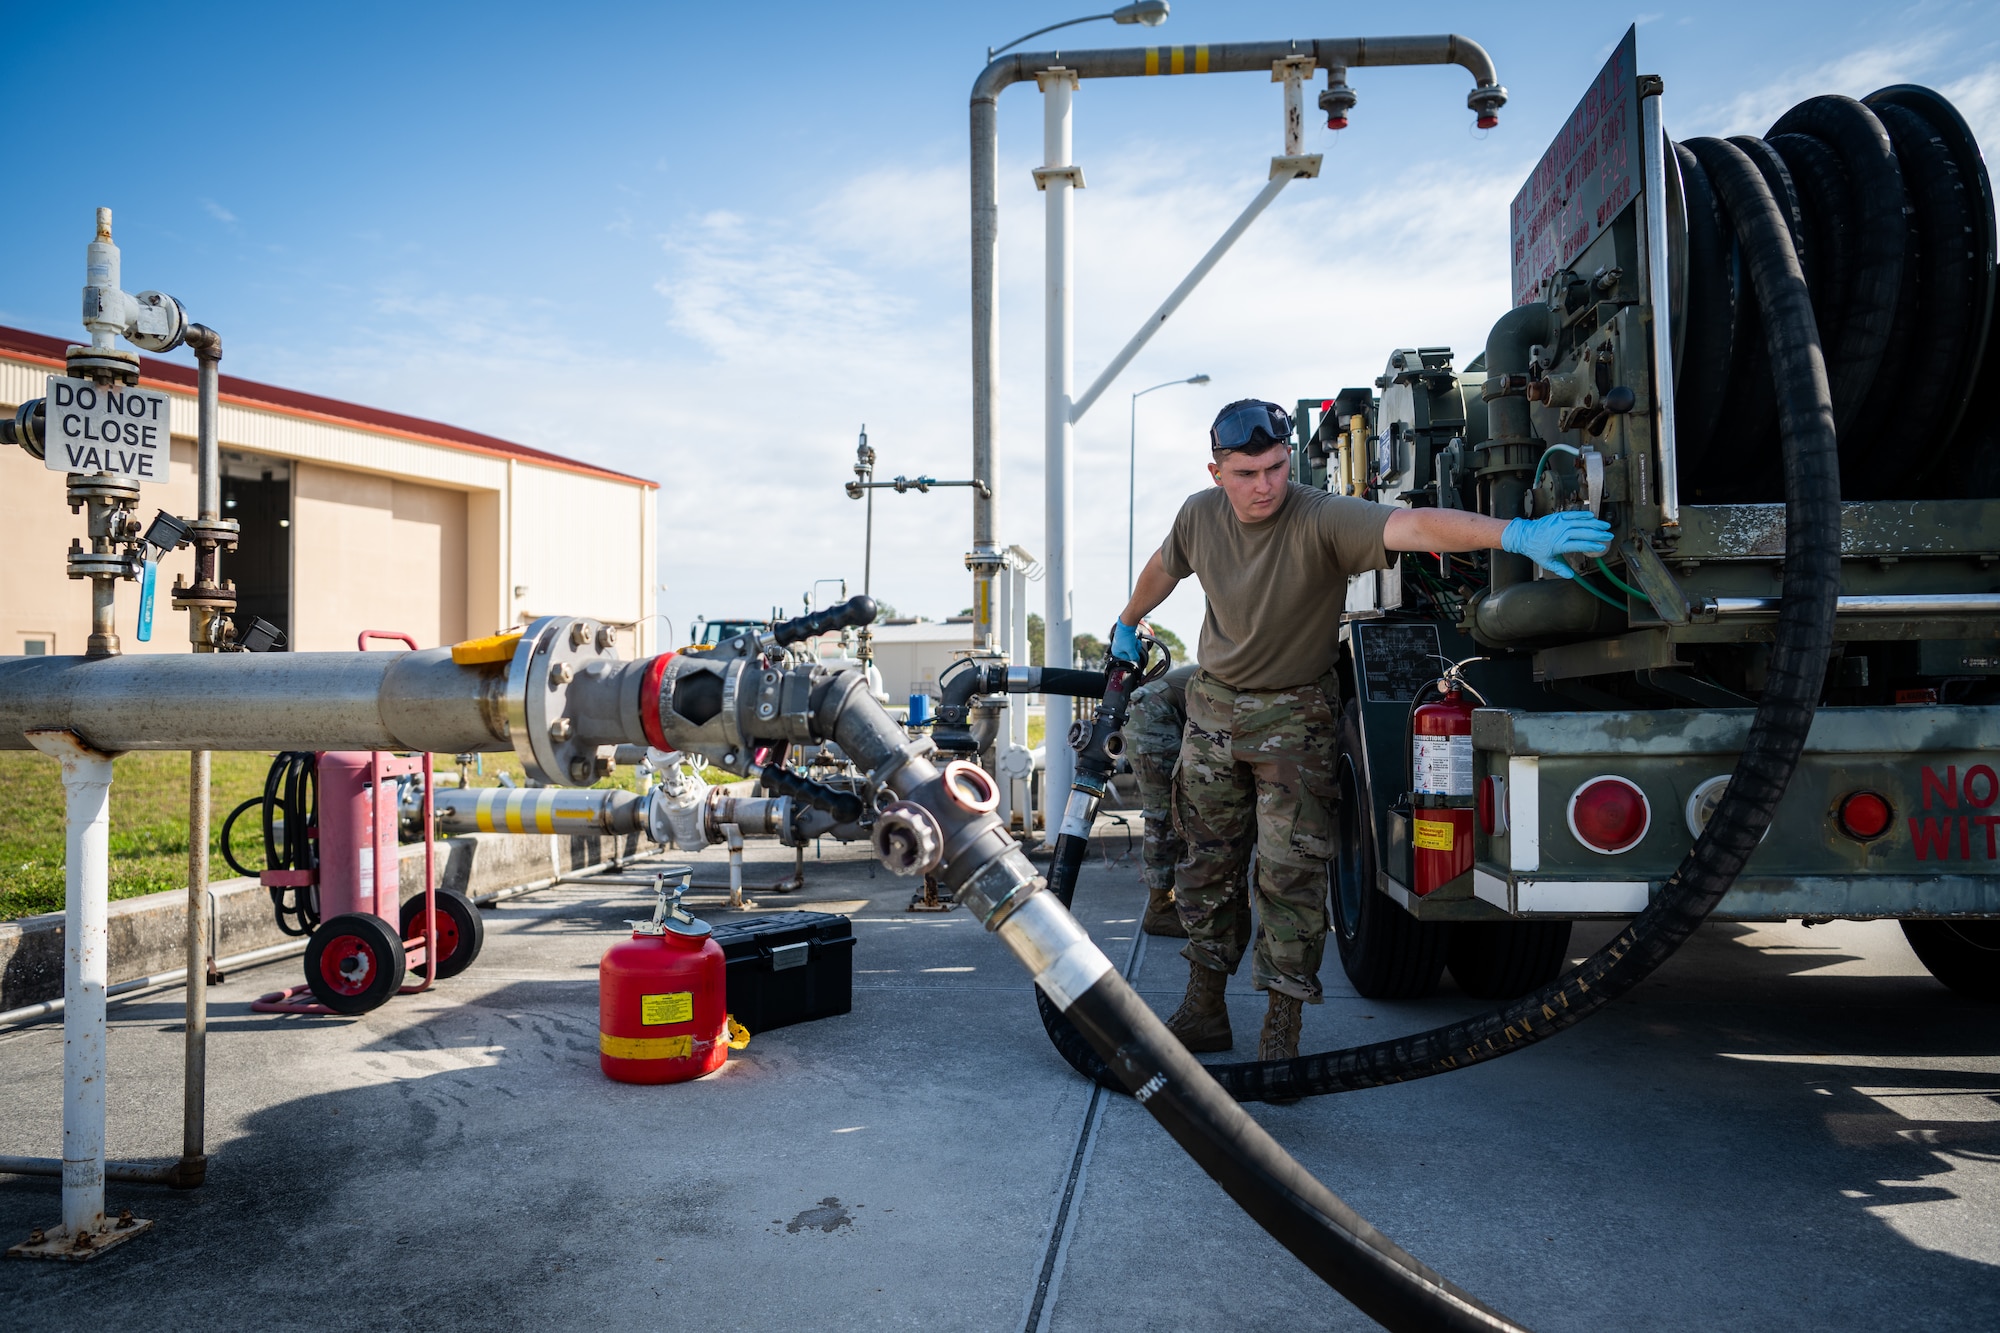 The test certifies the 6th LRS POL flight’s capability to perform hot pit refueling with their R-12 refueling truck. (U.S. Air Force photo by Senior Airman Zachary Foster)